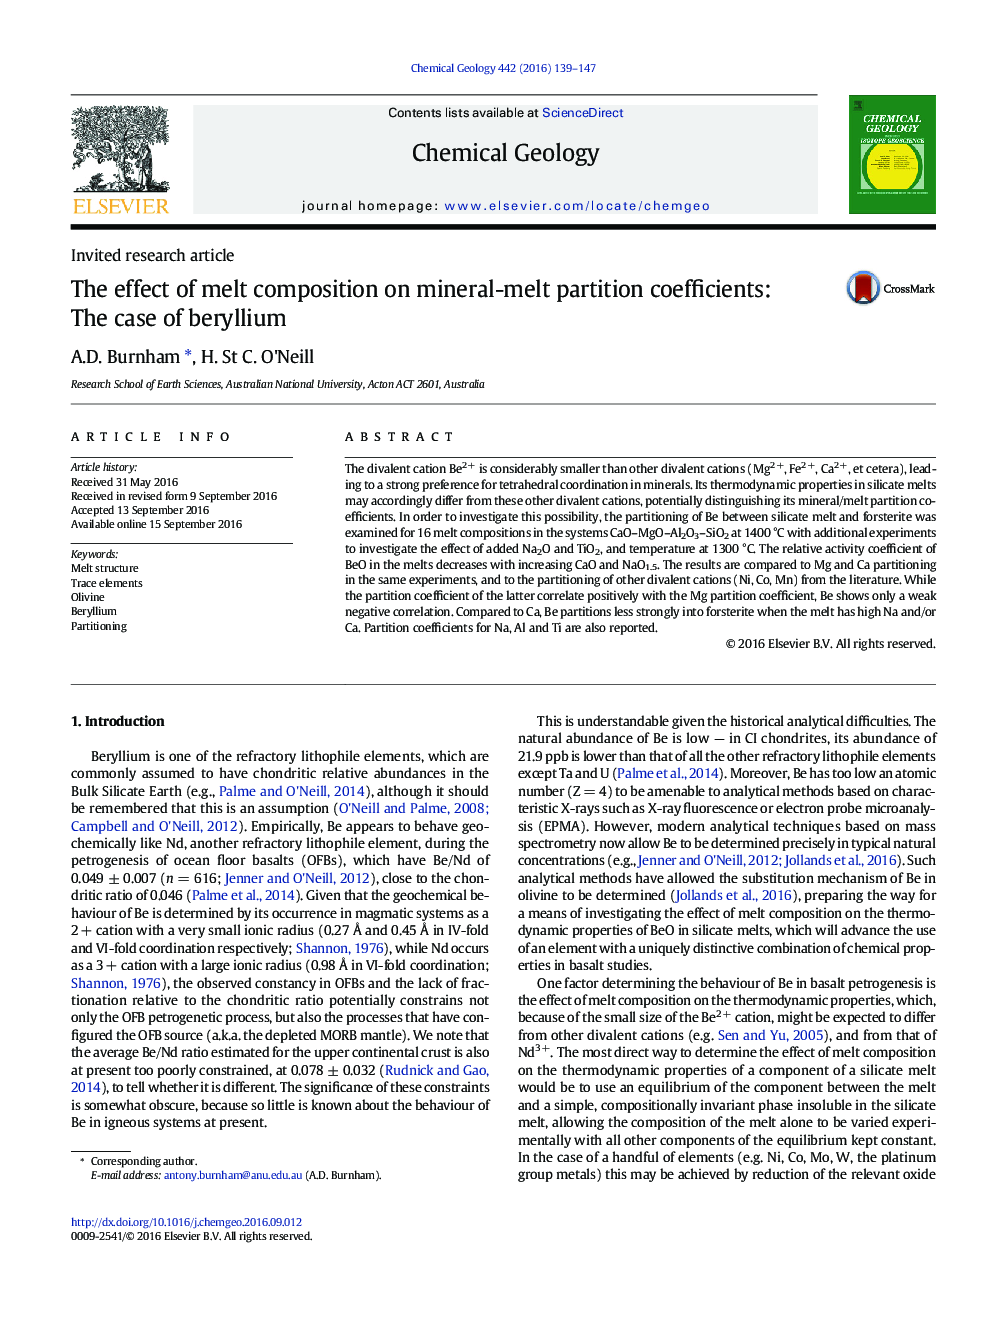 The effect of melt composition on mineral-melt partition coefficients: The case of beryllium